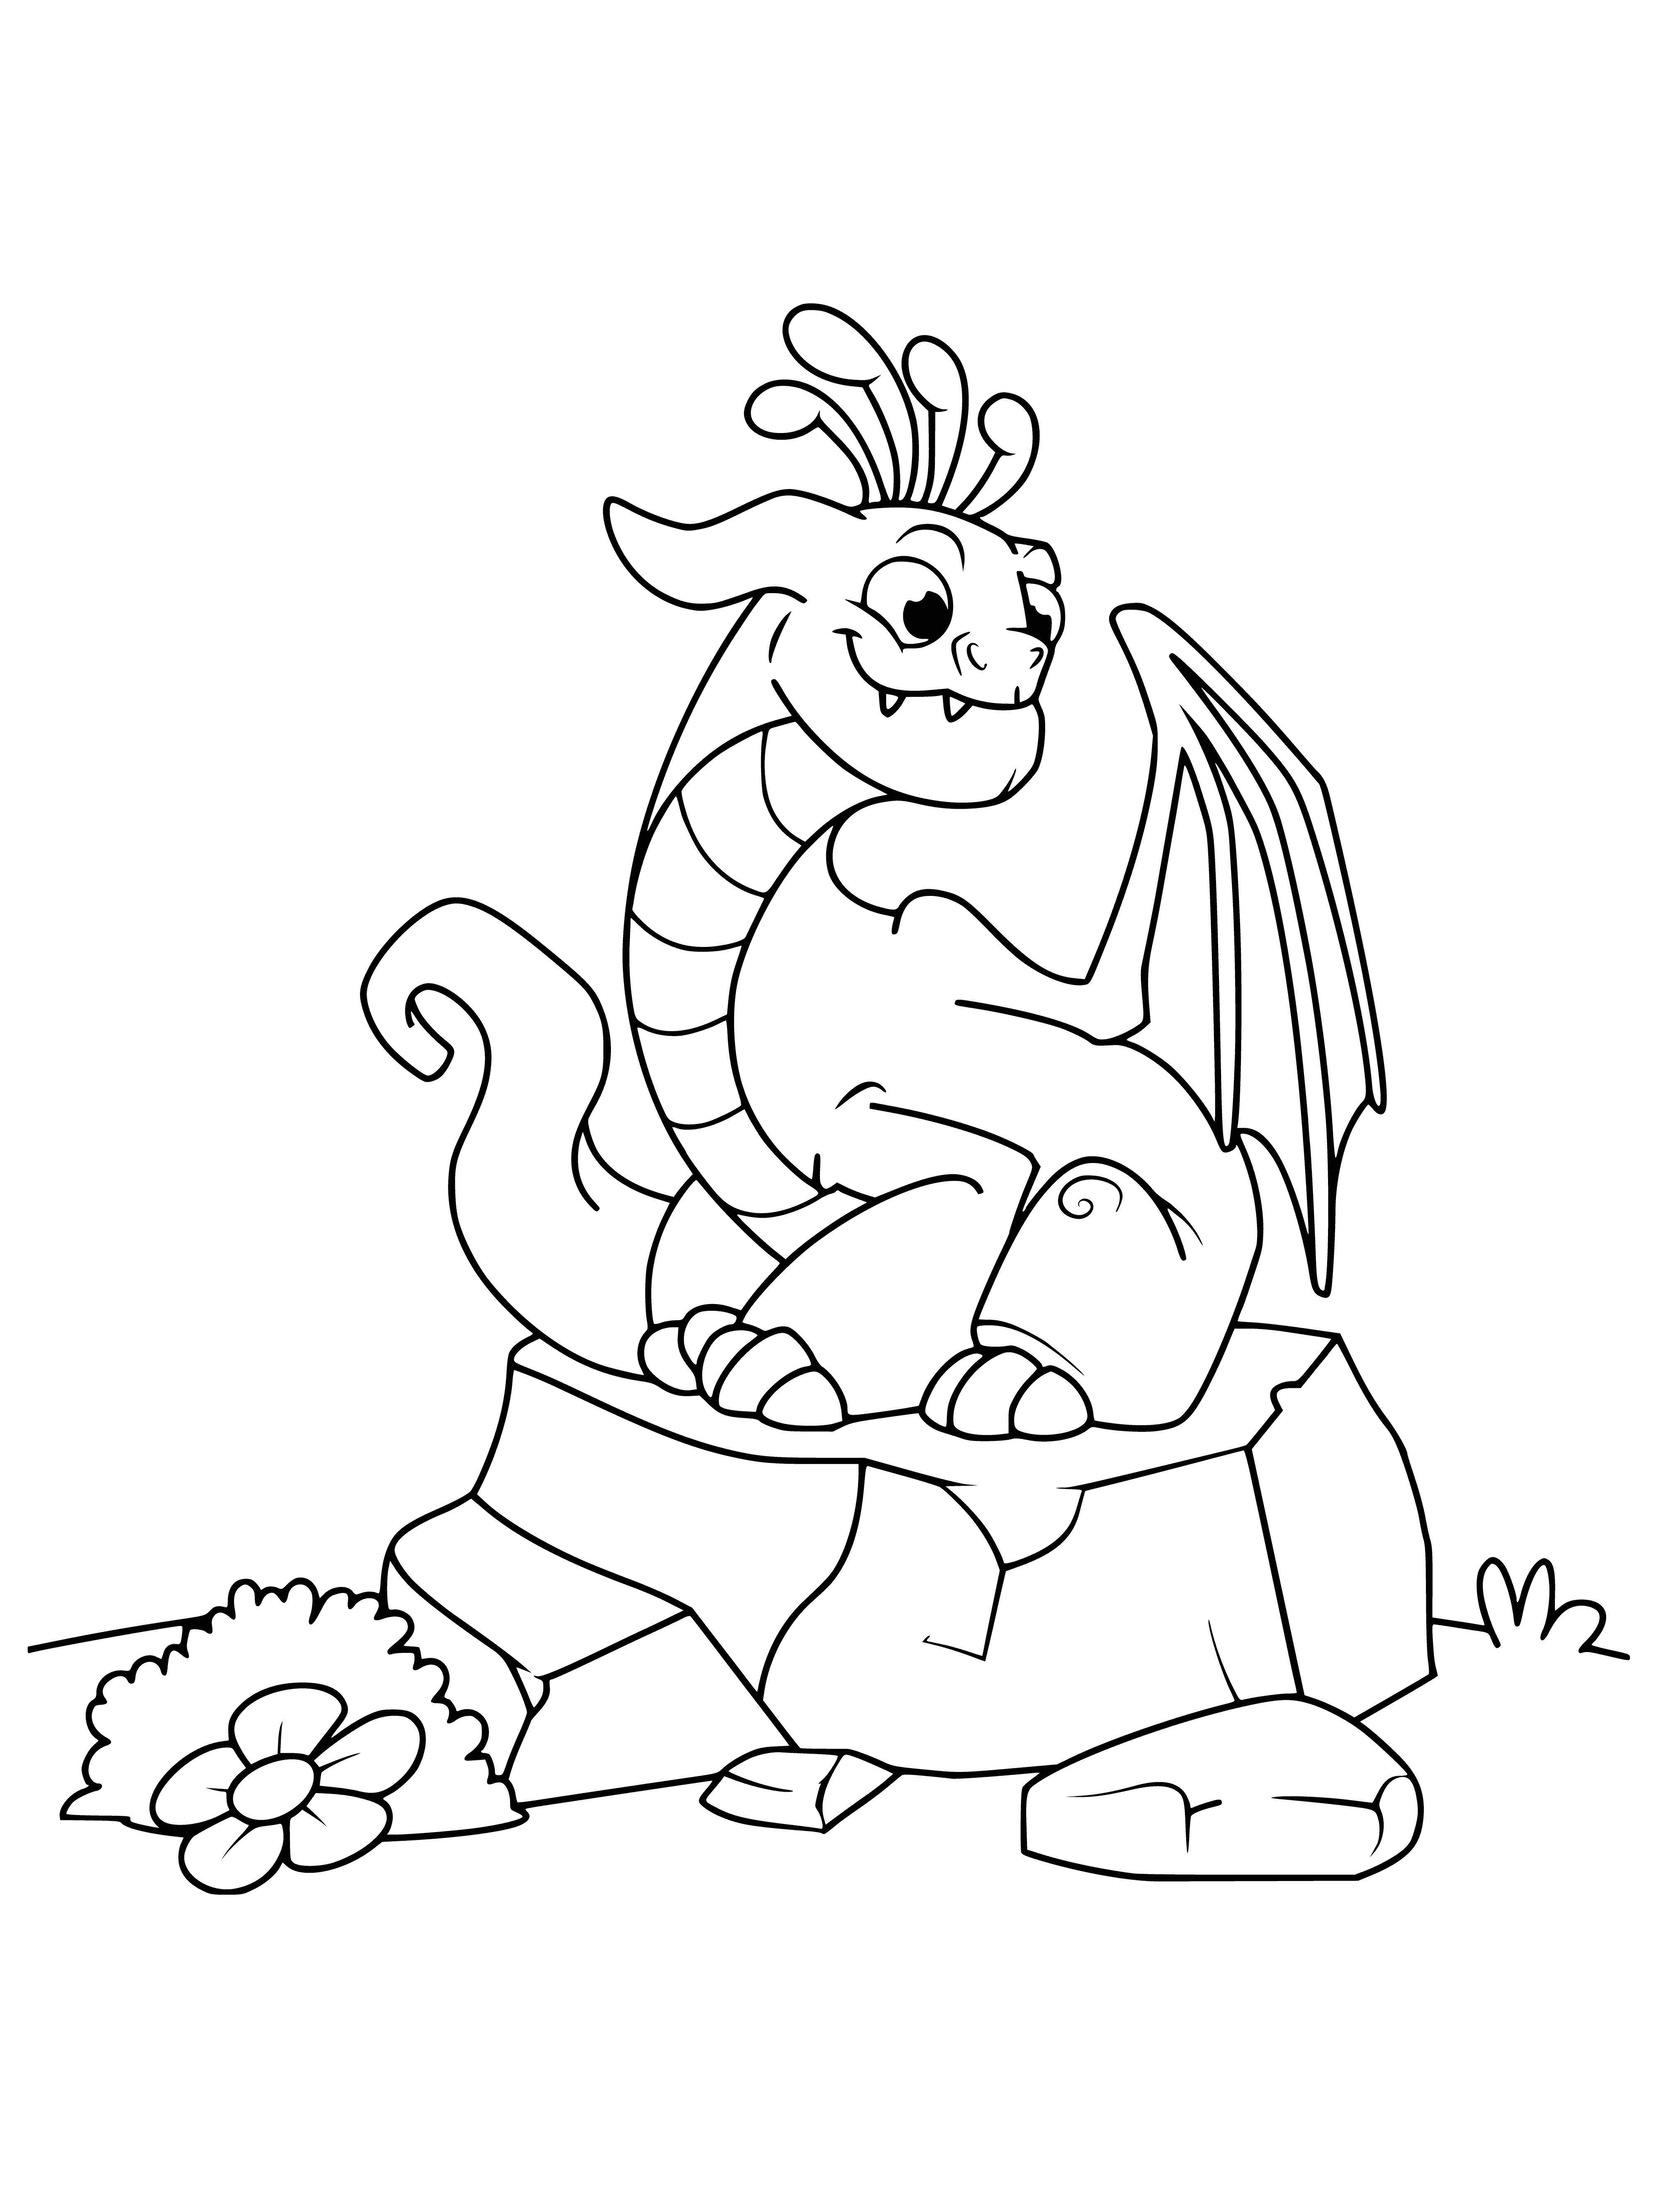 coloring page: A fierce dragon, with thick skin and sharp claws, billowing smoke from its nostrils, eyes glowing red and mouth open revealing sharp teeth, perches atop a stone pedestal.